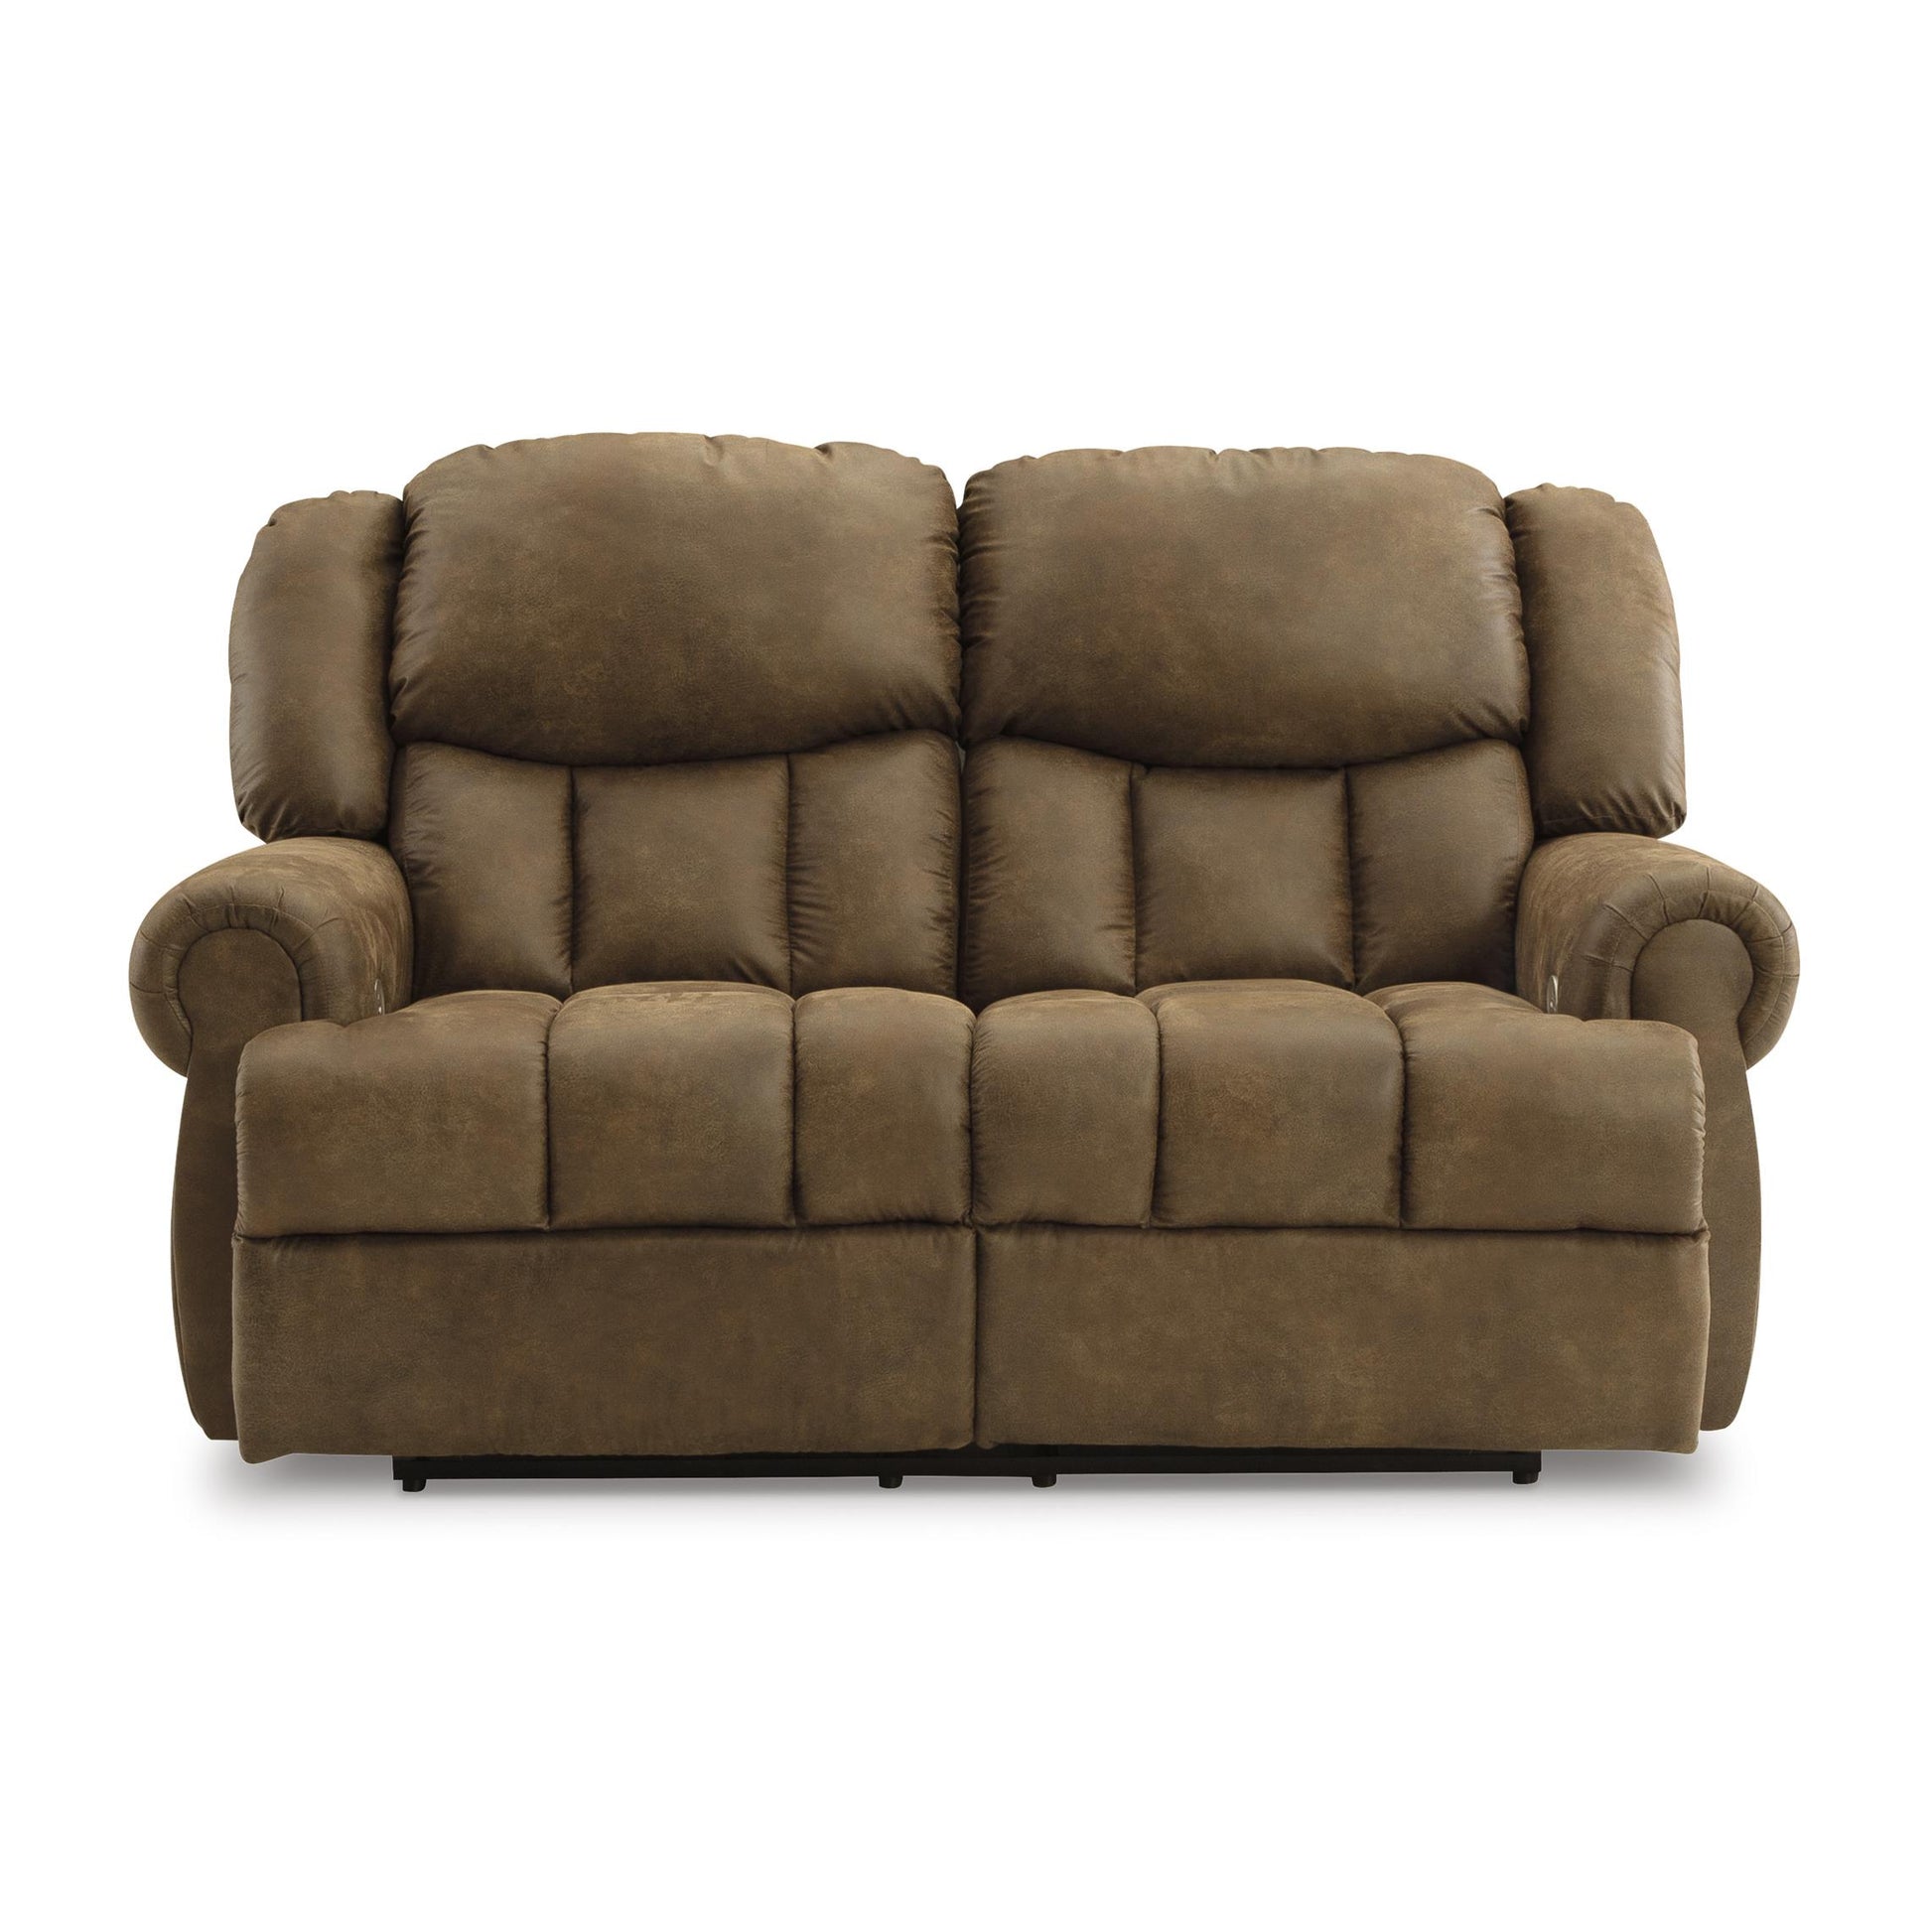 Signature Design by Ashley Boothbay Power Reclining Leather Look Loveseat 4470474 IMAGE 3